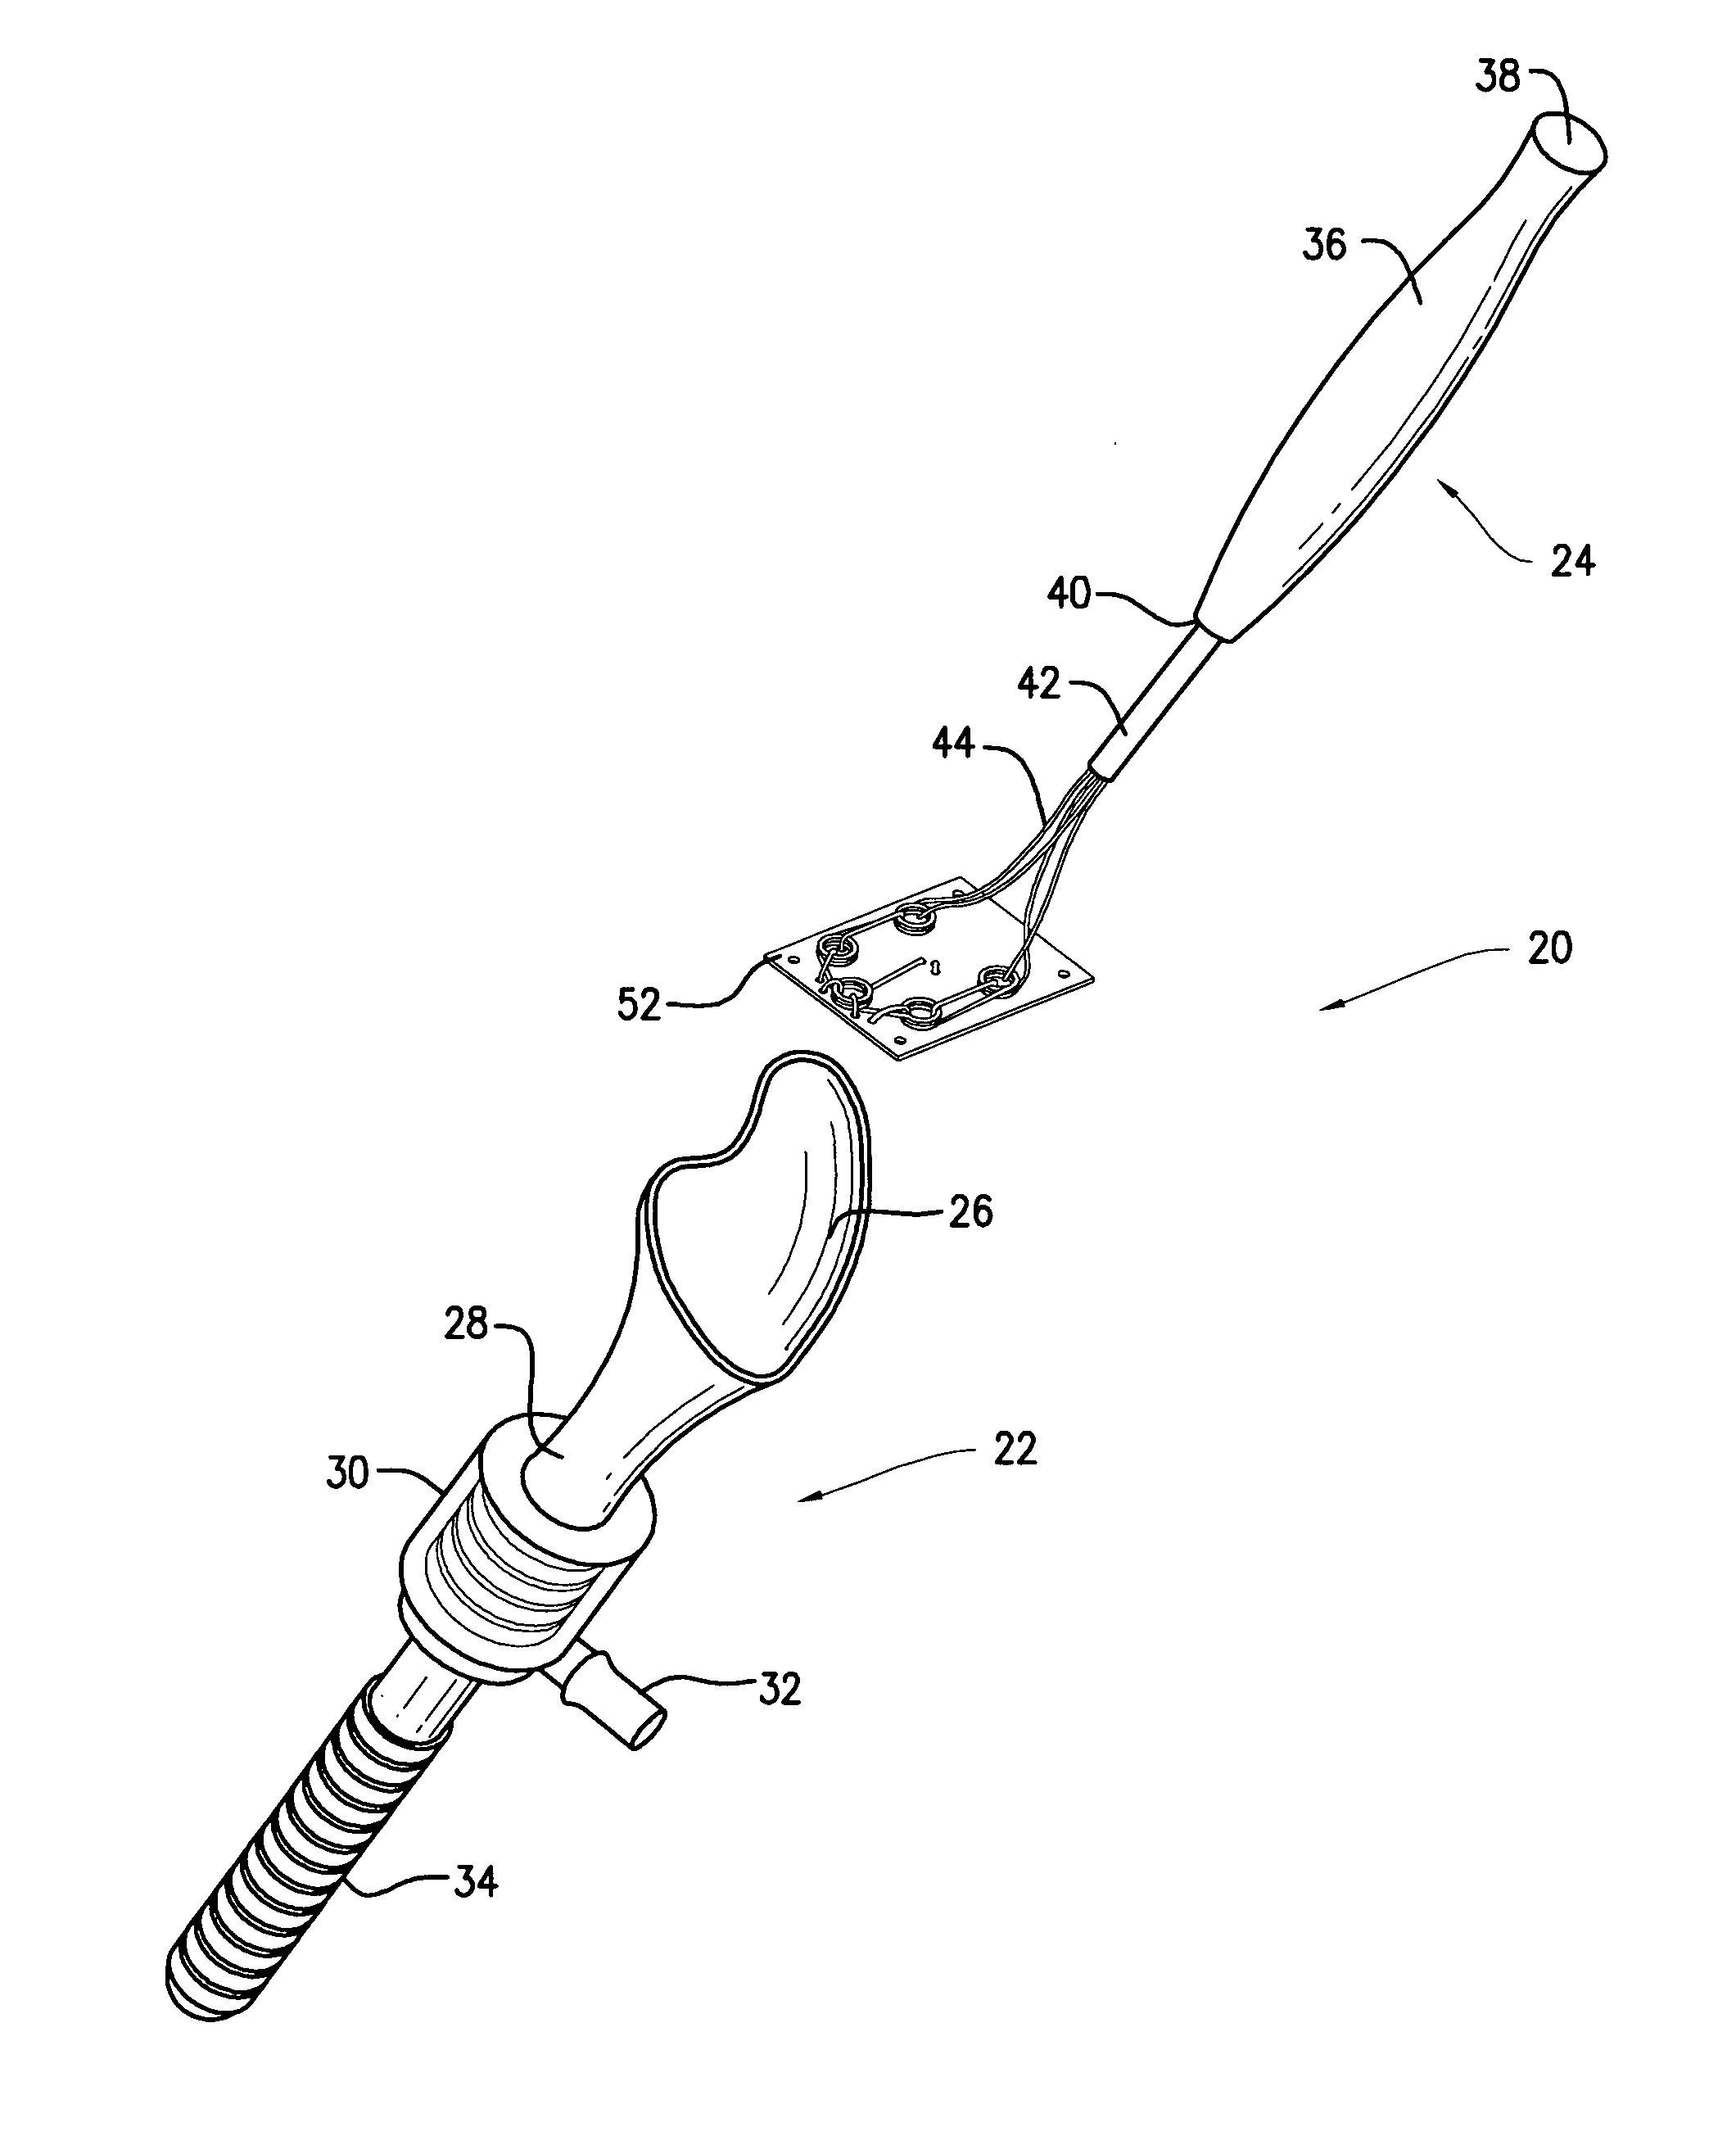 Augmentation delivery device